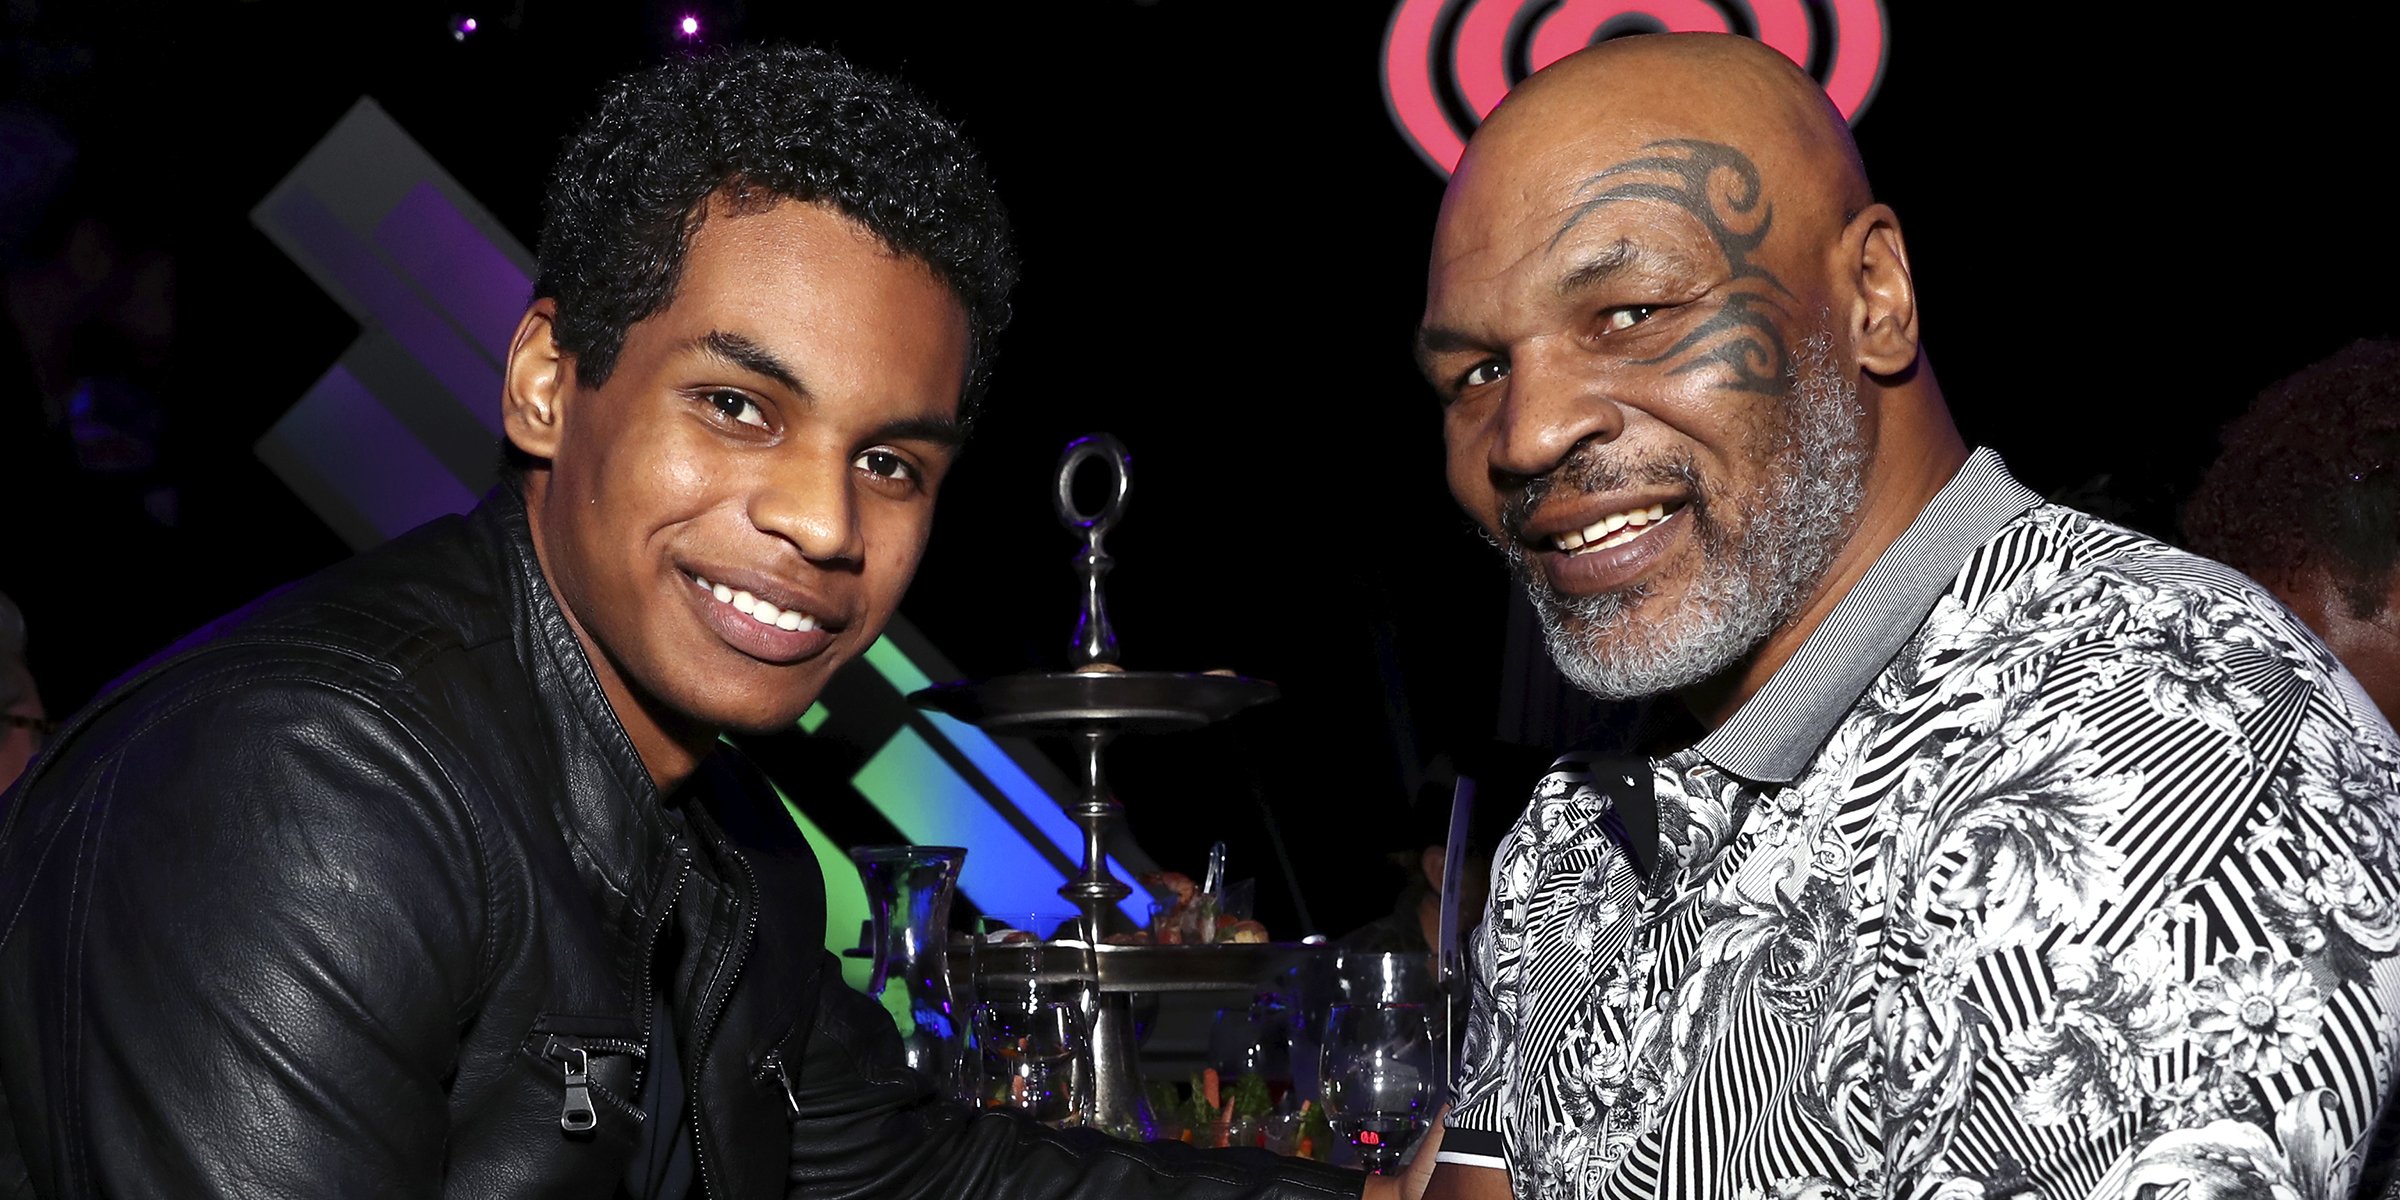 Miguel Leon Tyson and Mike Tyson, 2019 | Source: Getty Images